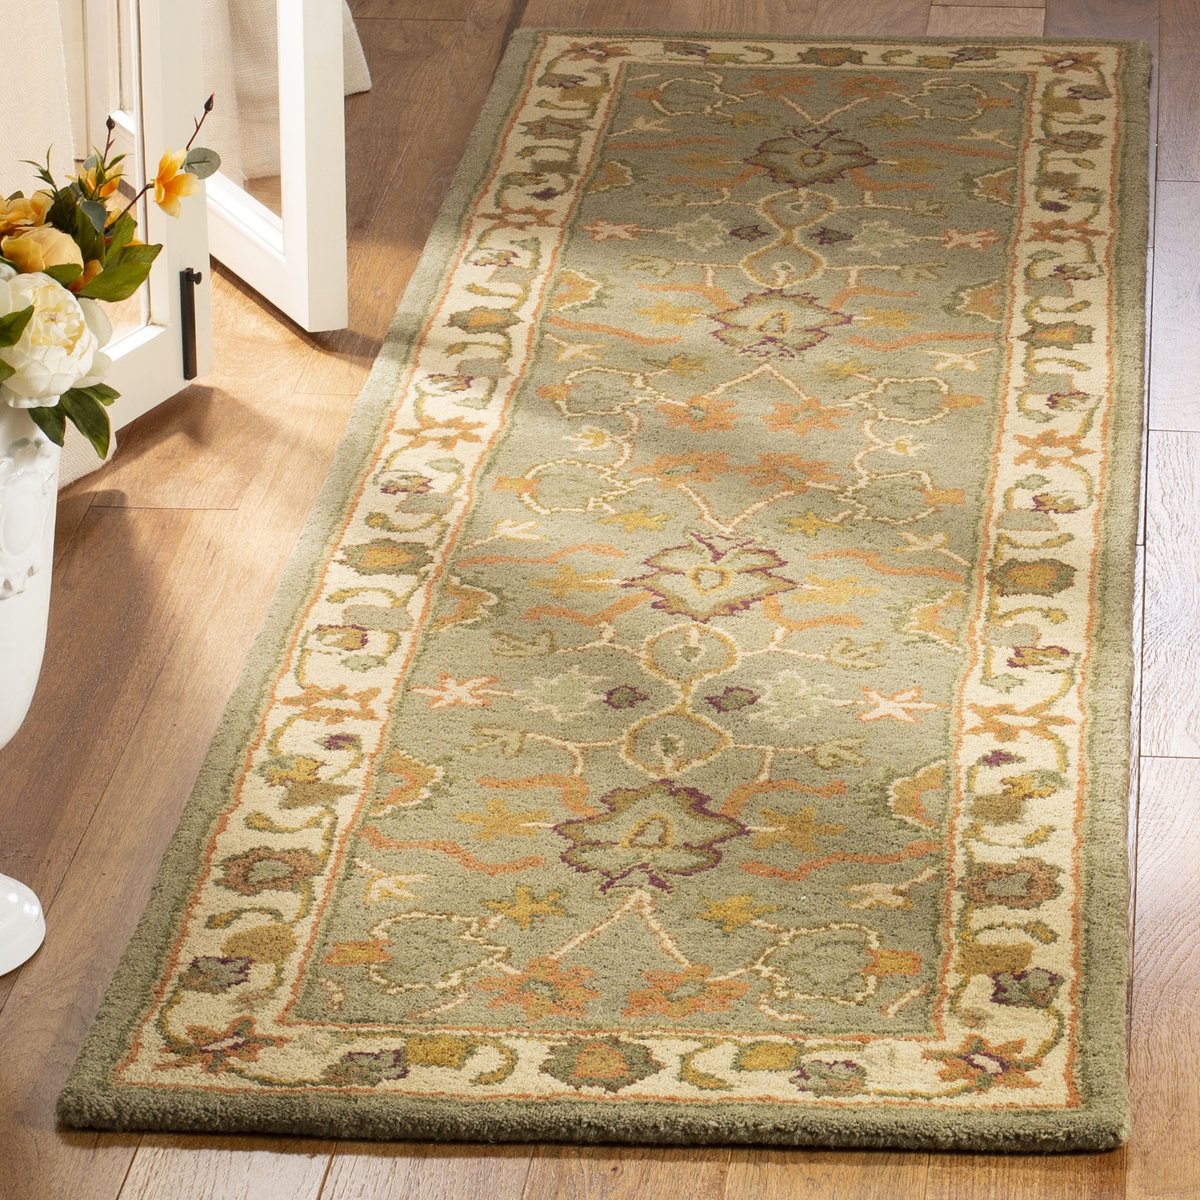 SAFAVIEH Heritage Collection X-Large Area Rug - 12' x 18', Brown & Blue,  Handmade Traditional Oriental Wool, Ideal for High Traffic Areas in Living